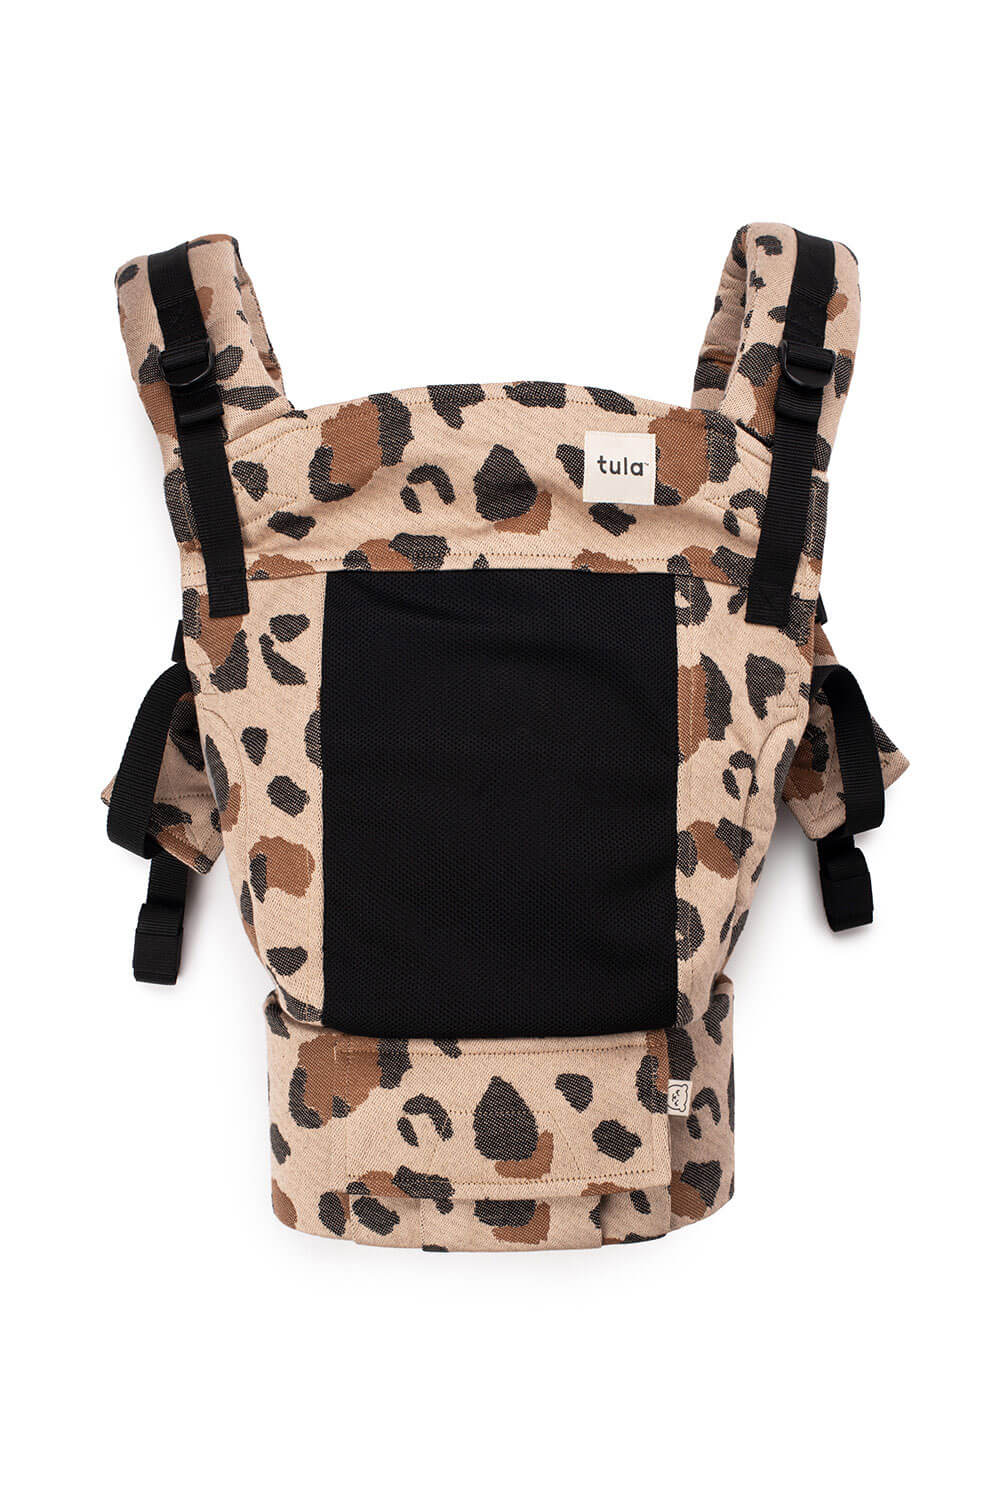 Safari Leopard - Signature Woven Free-to-Grow Baby Carrier